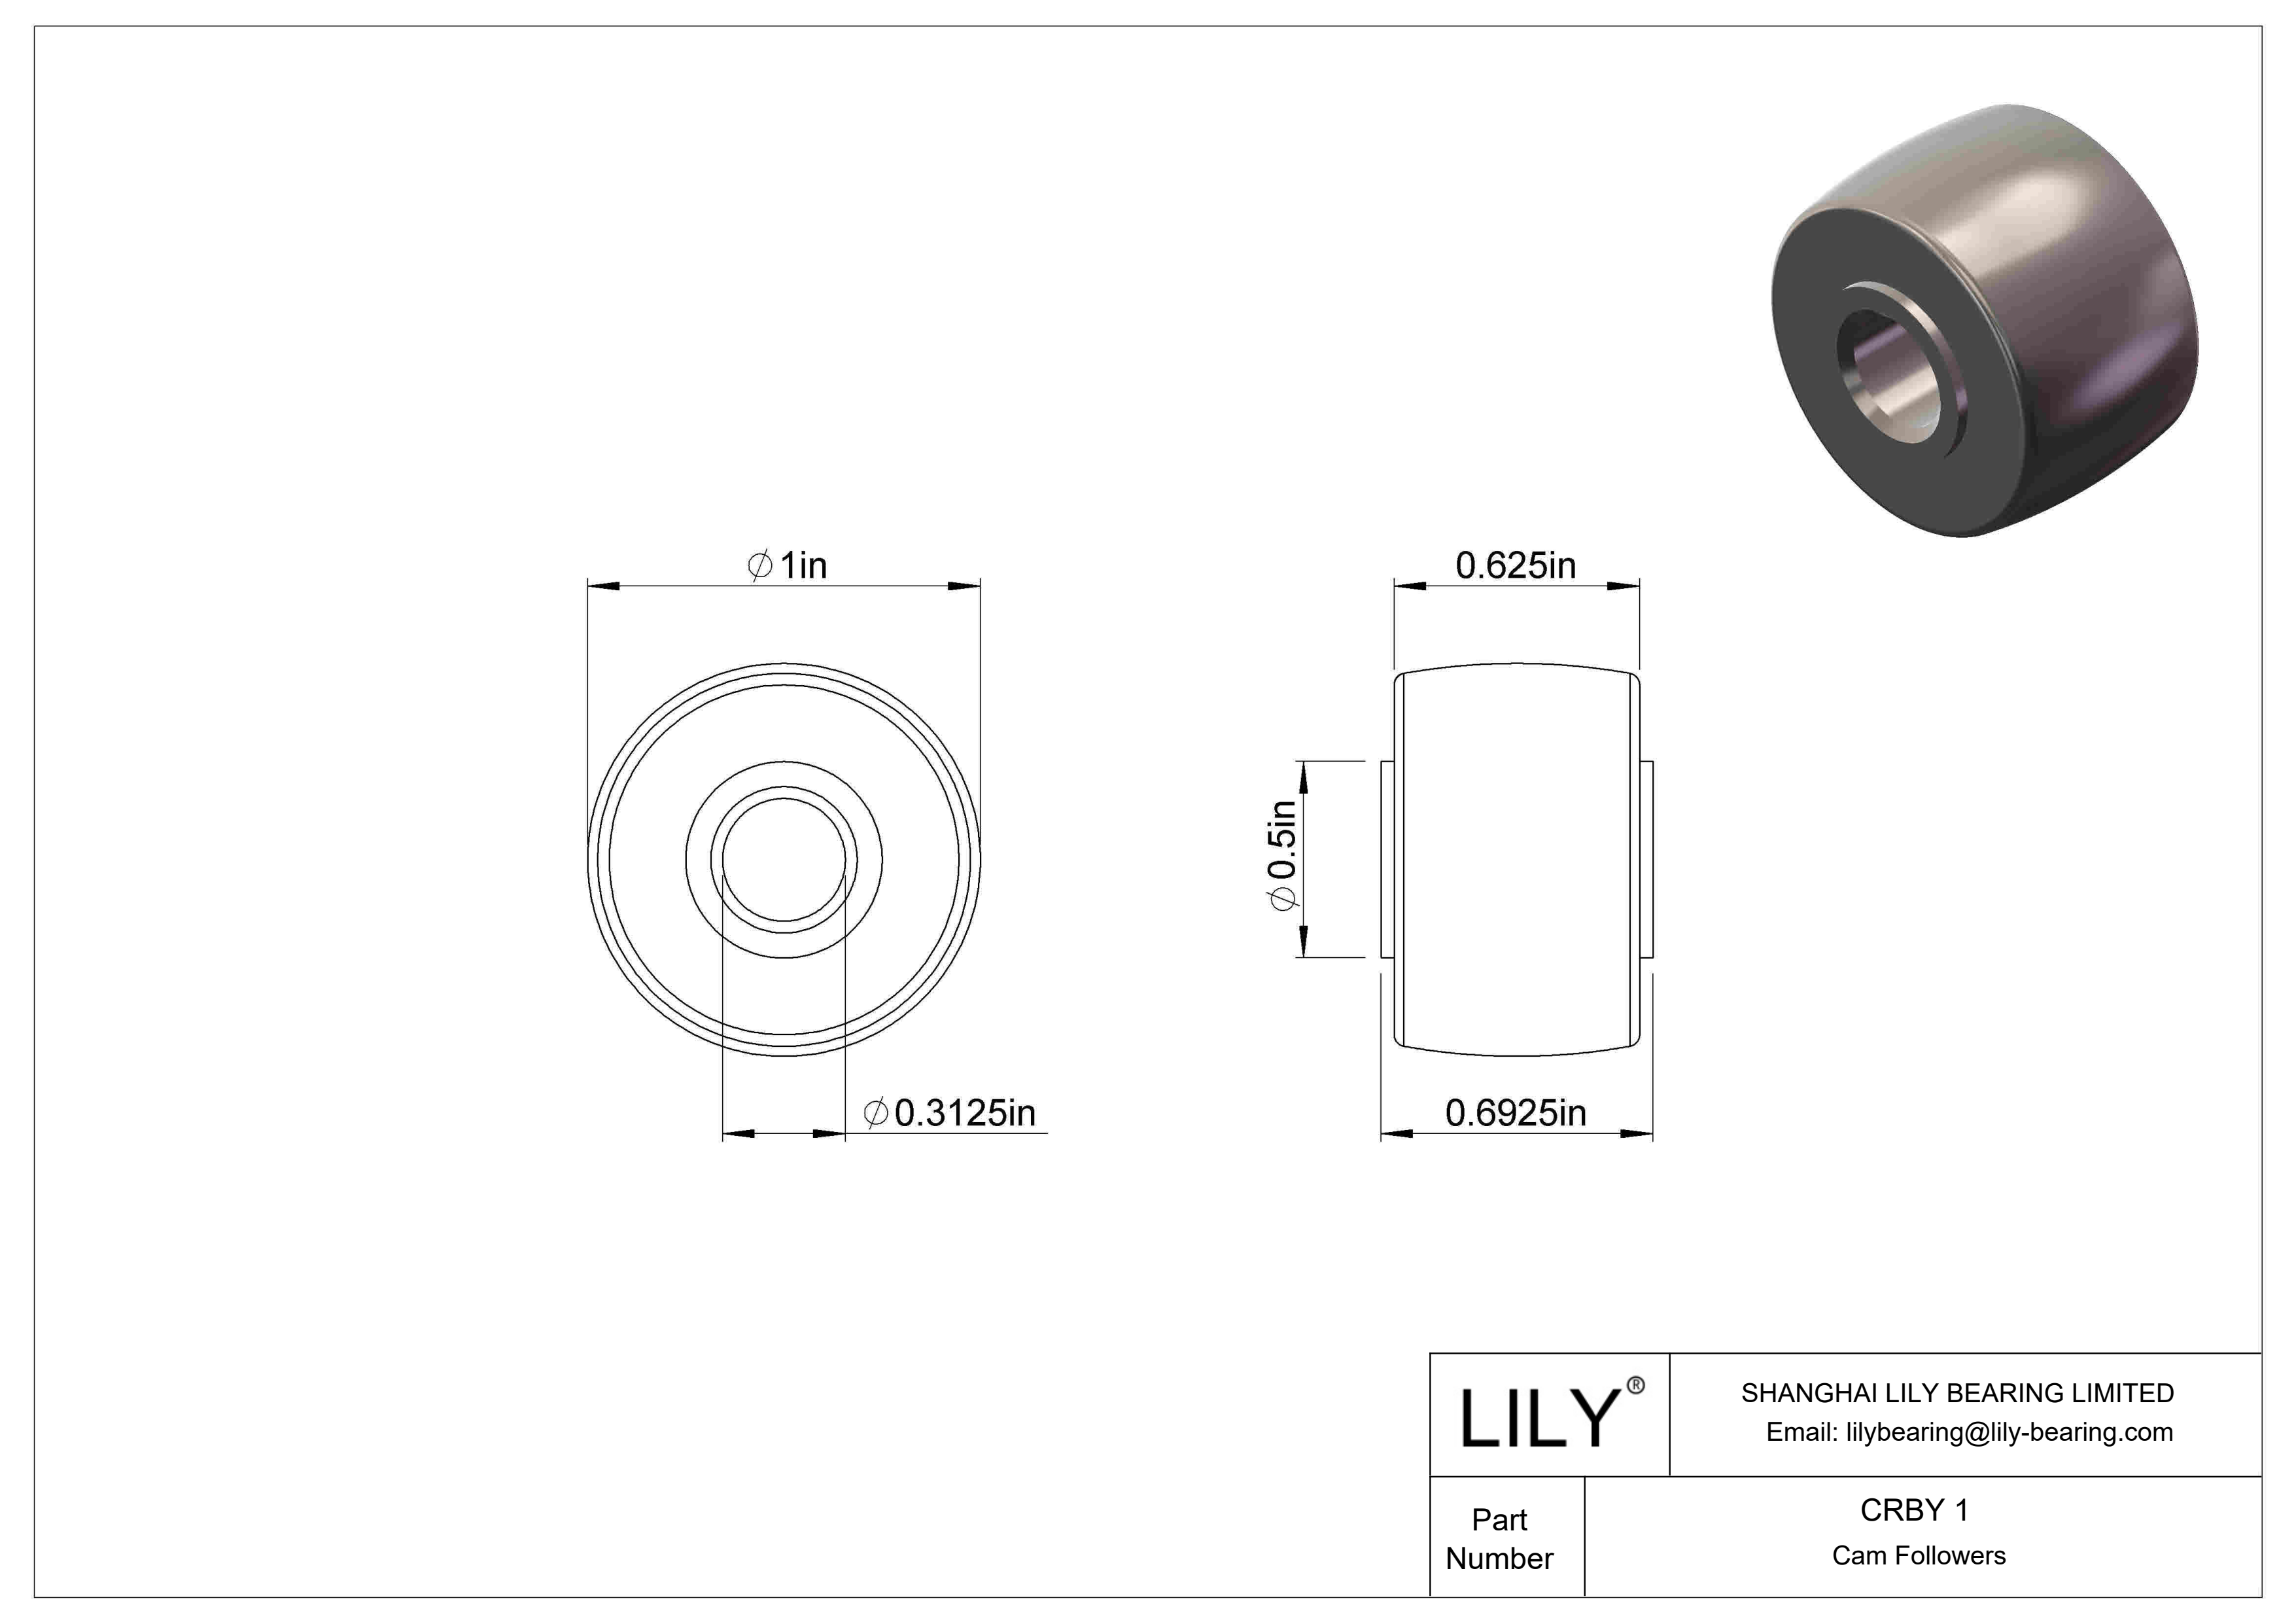 CRBY 1 Roller Cam Follower-Yoke Type cad drawing